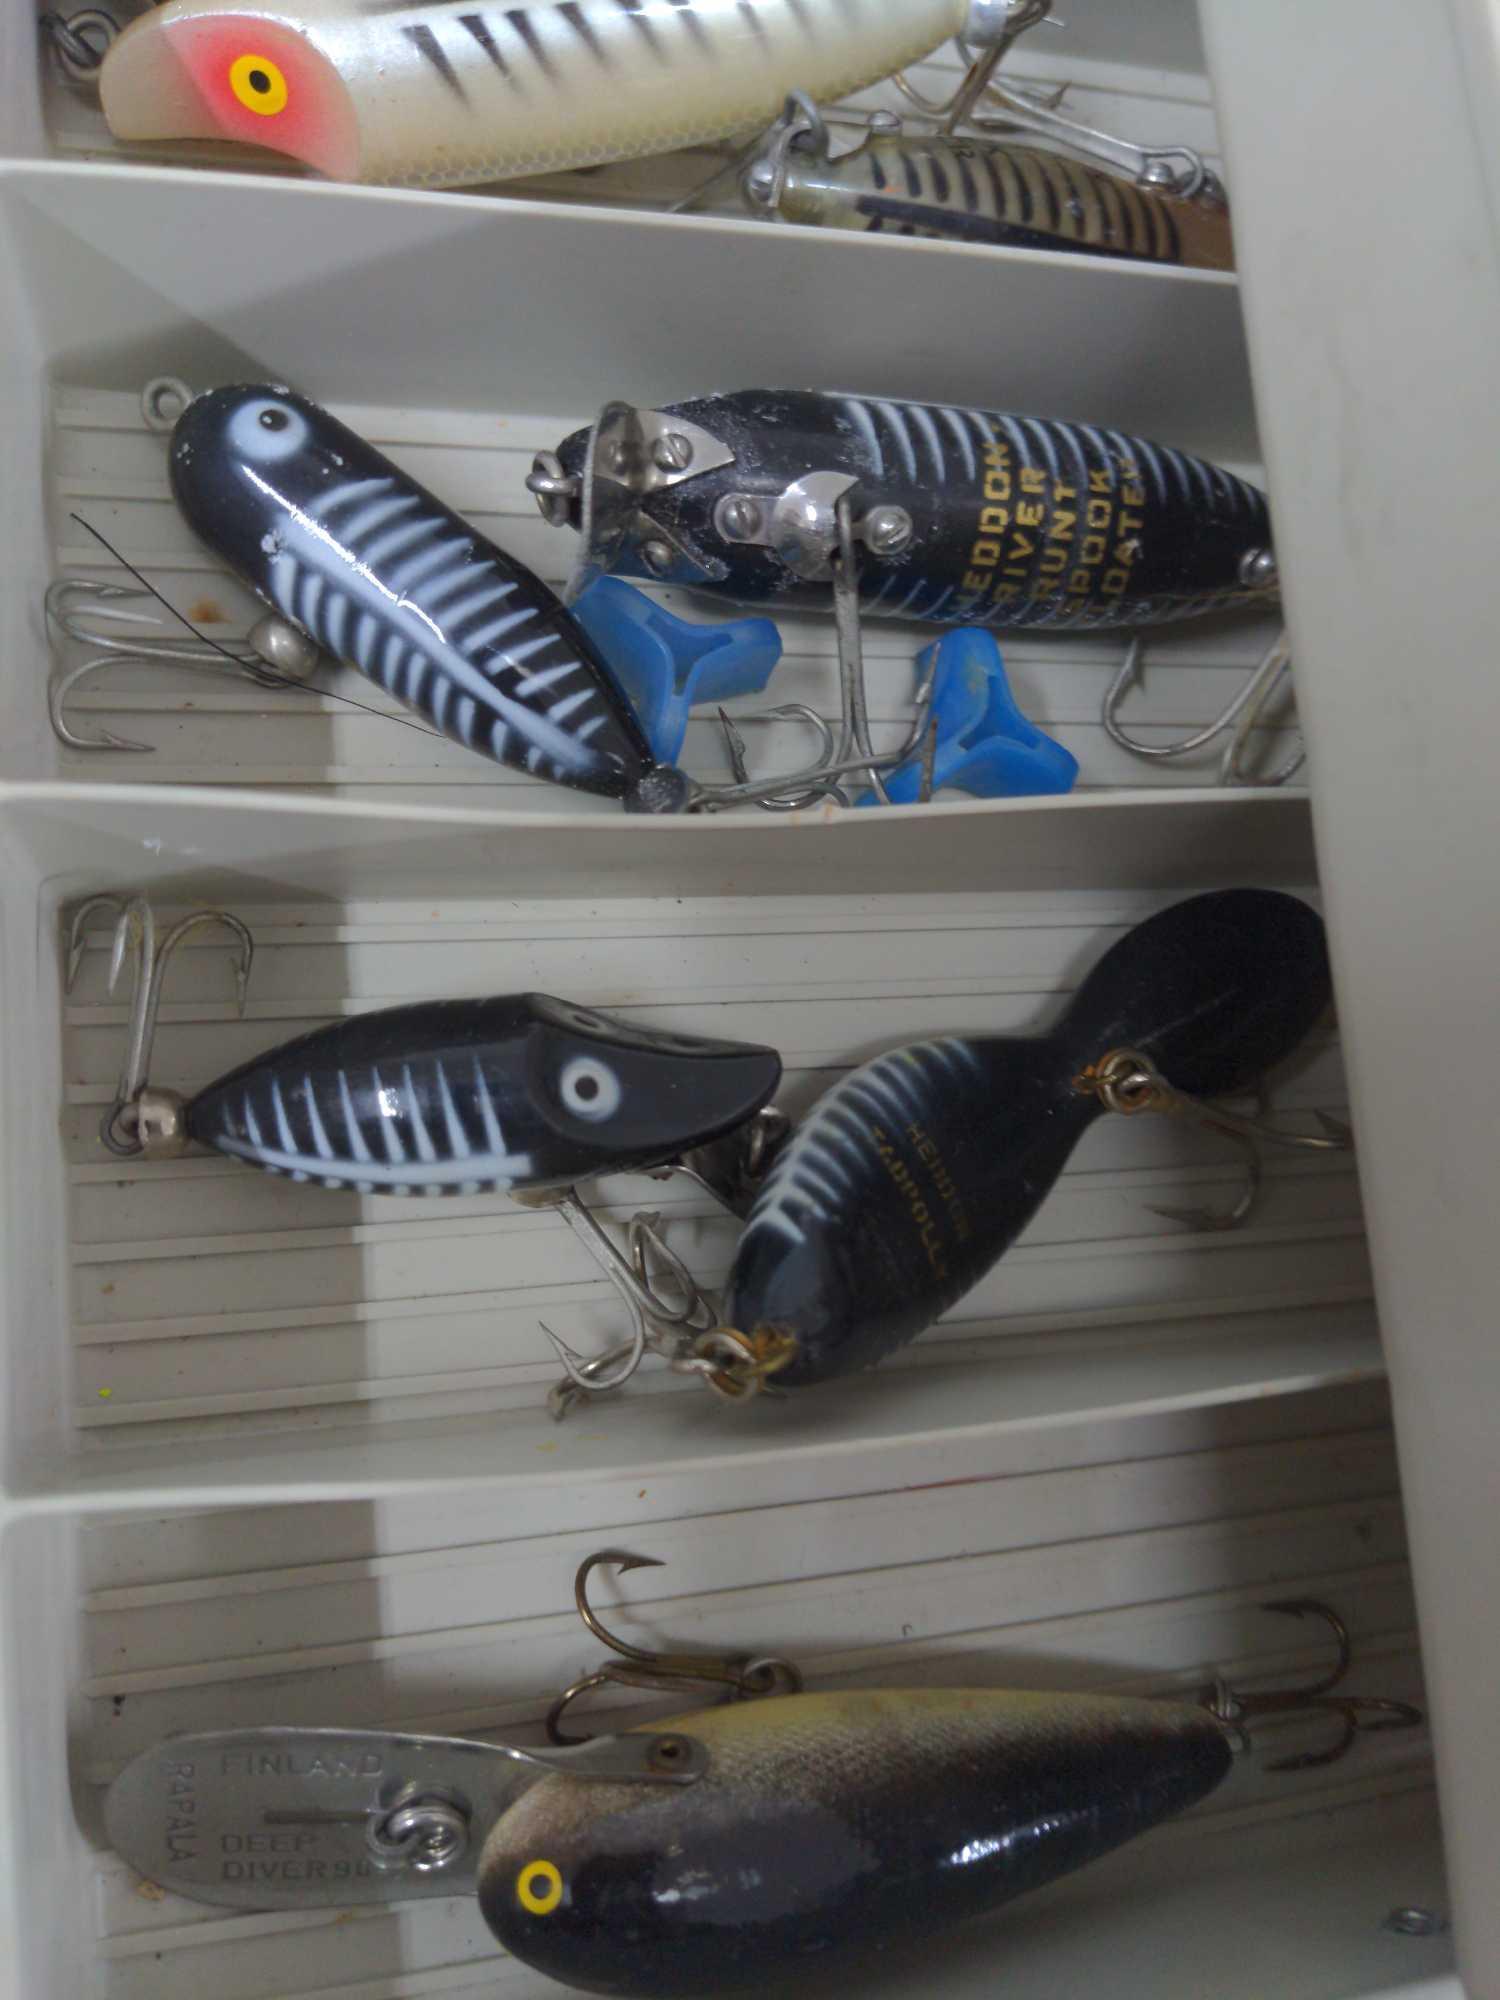 Huge Tackle Box full of Vintage fishing lures